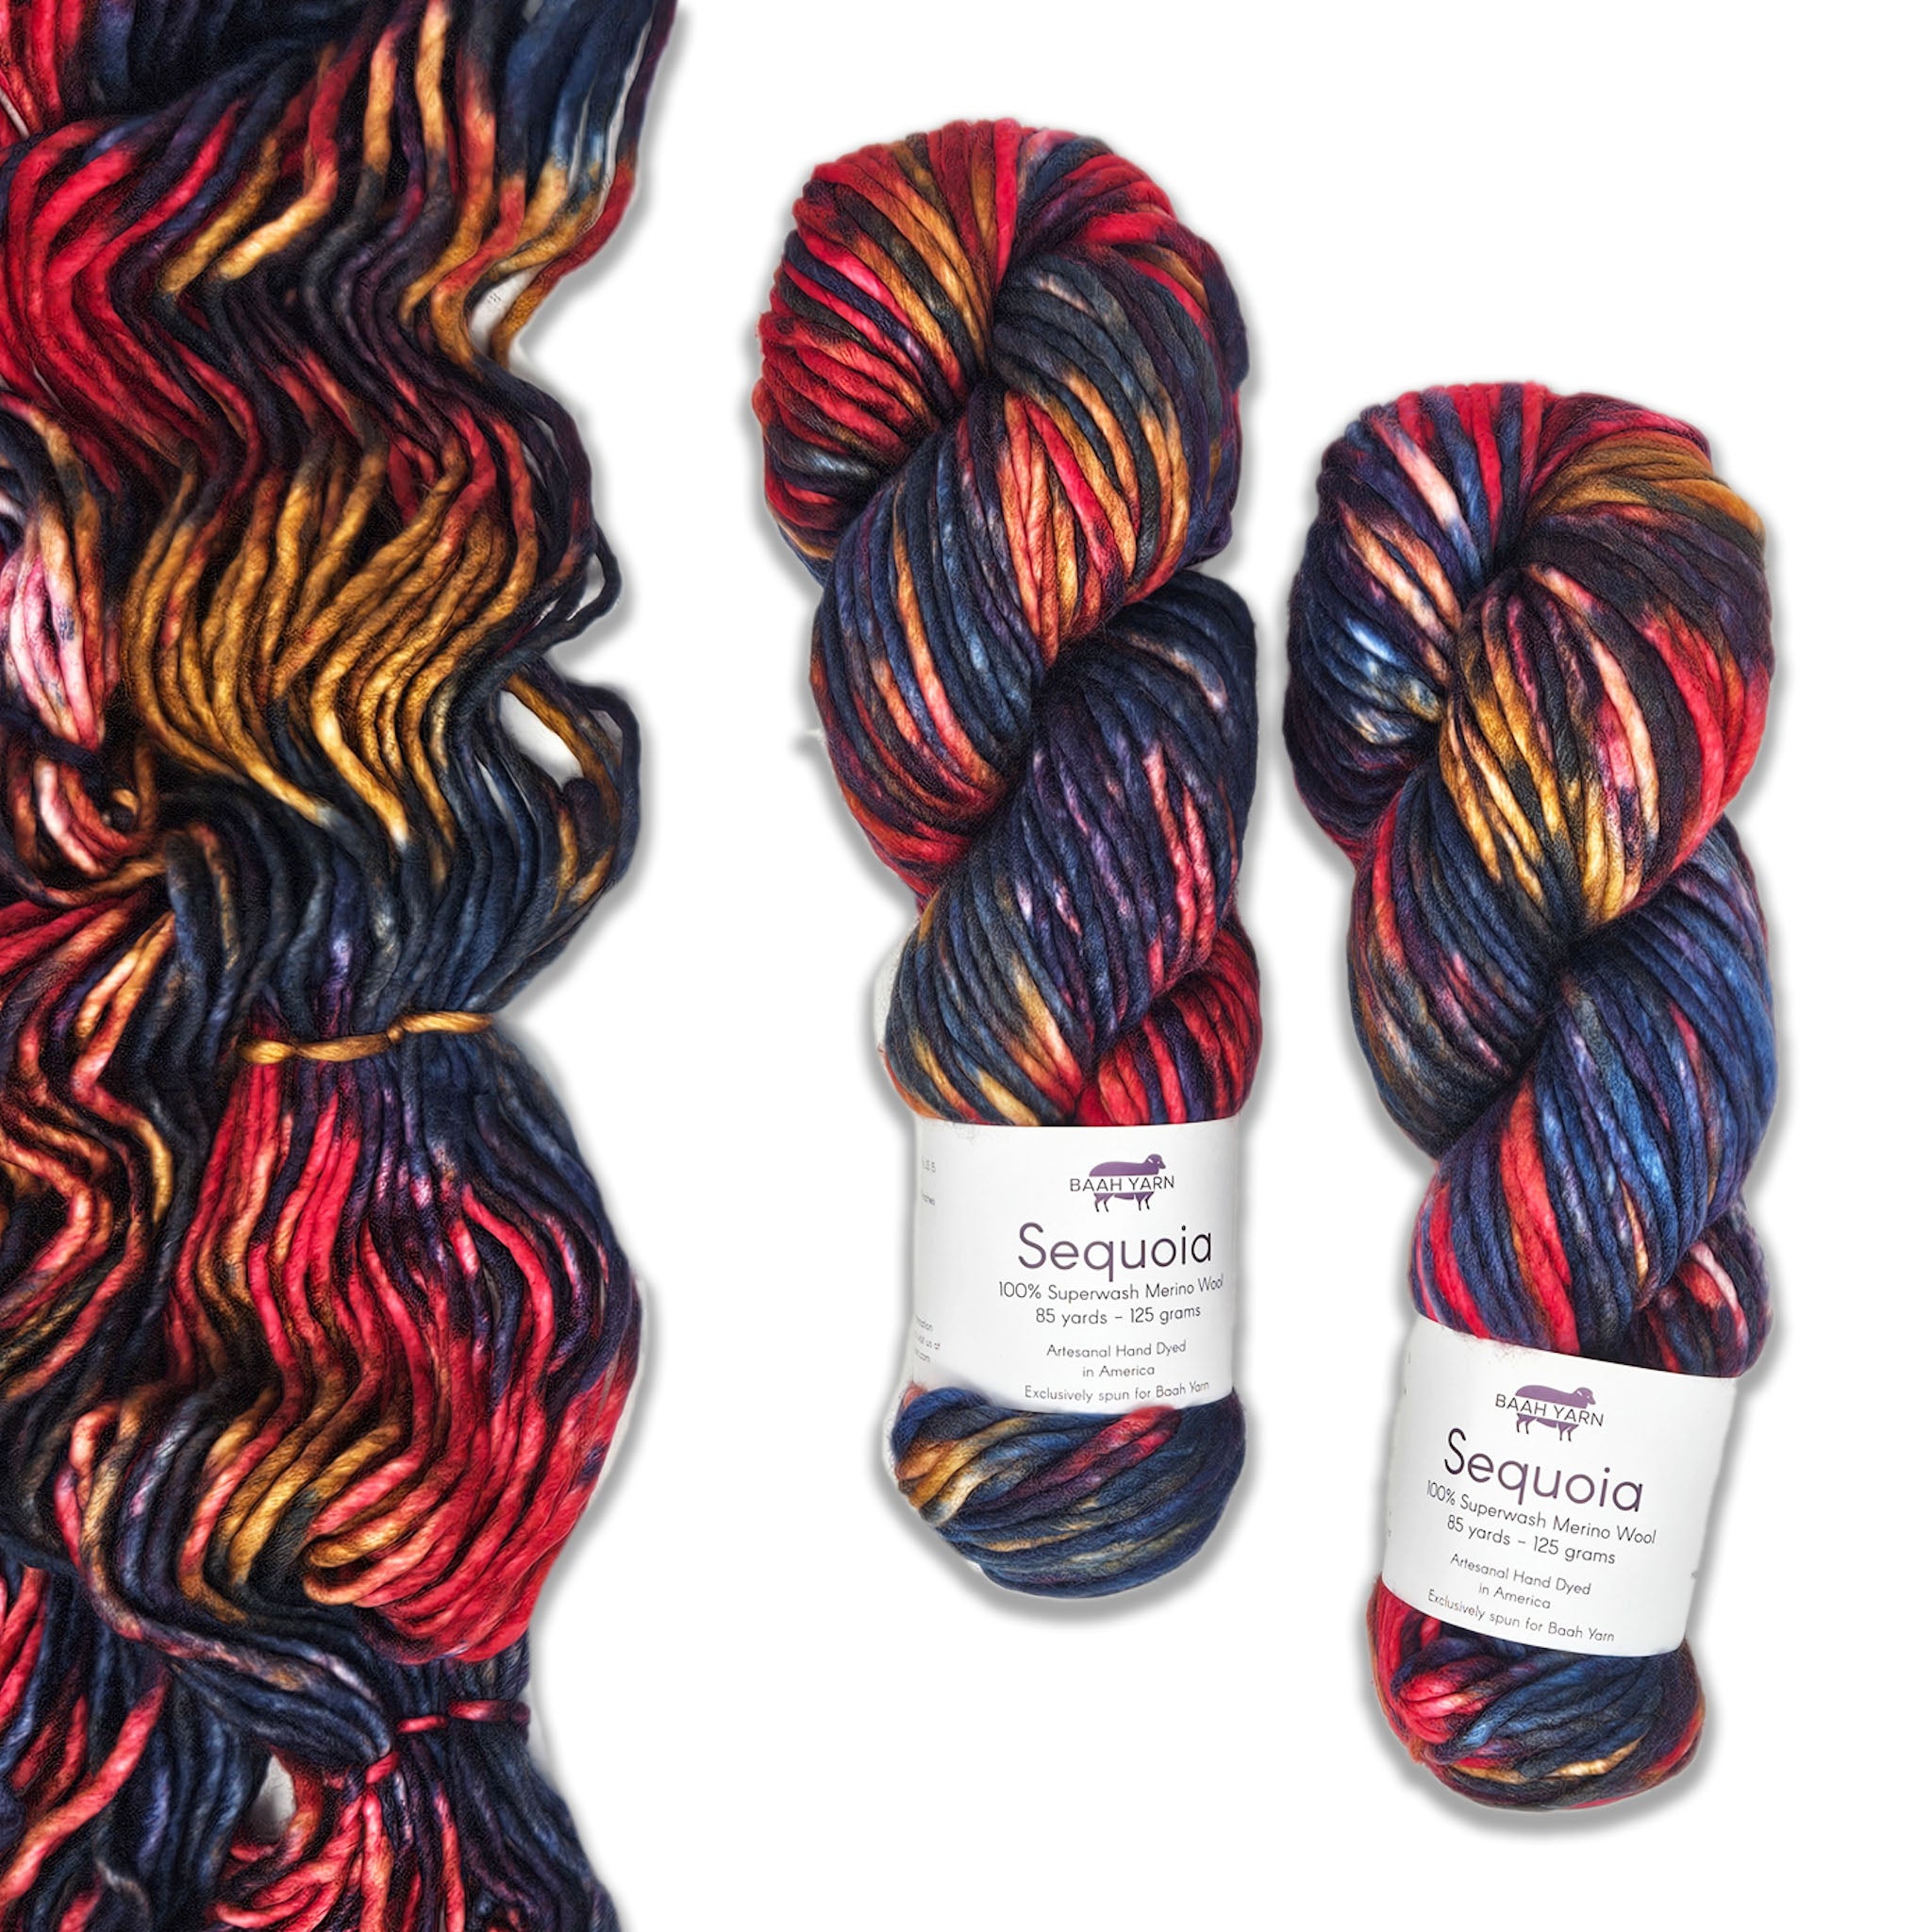 Baah Yarn Sequoia - Get it While it's Hot!